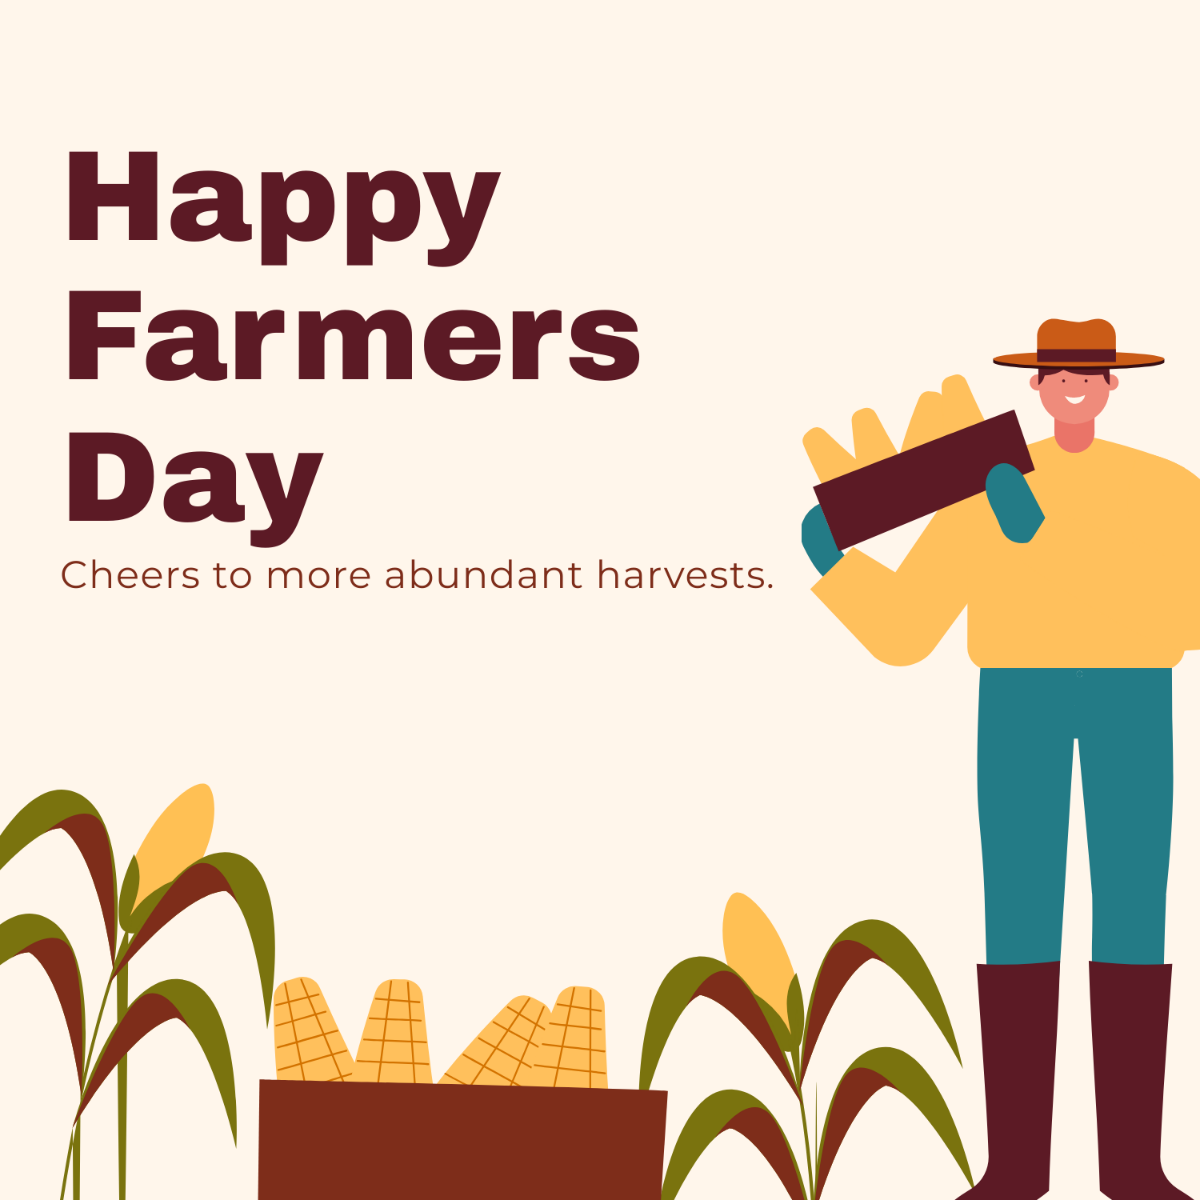 Farmers Day Greeting Card Vector